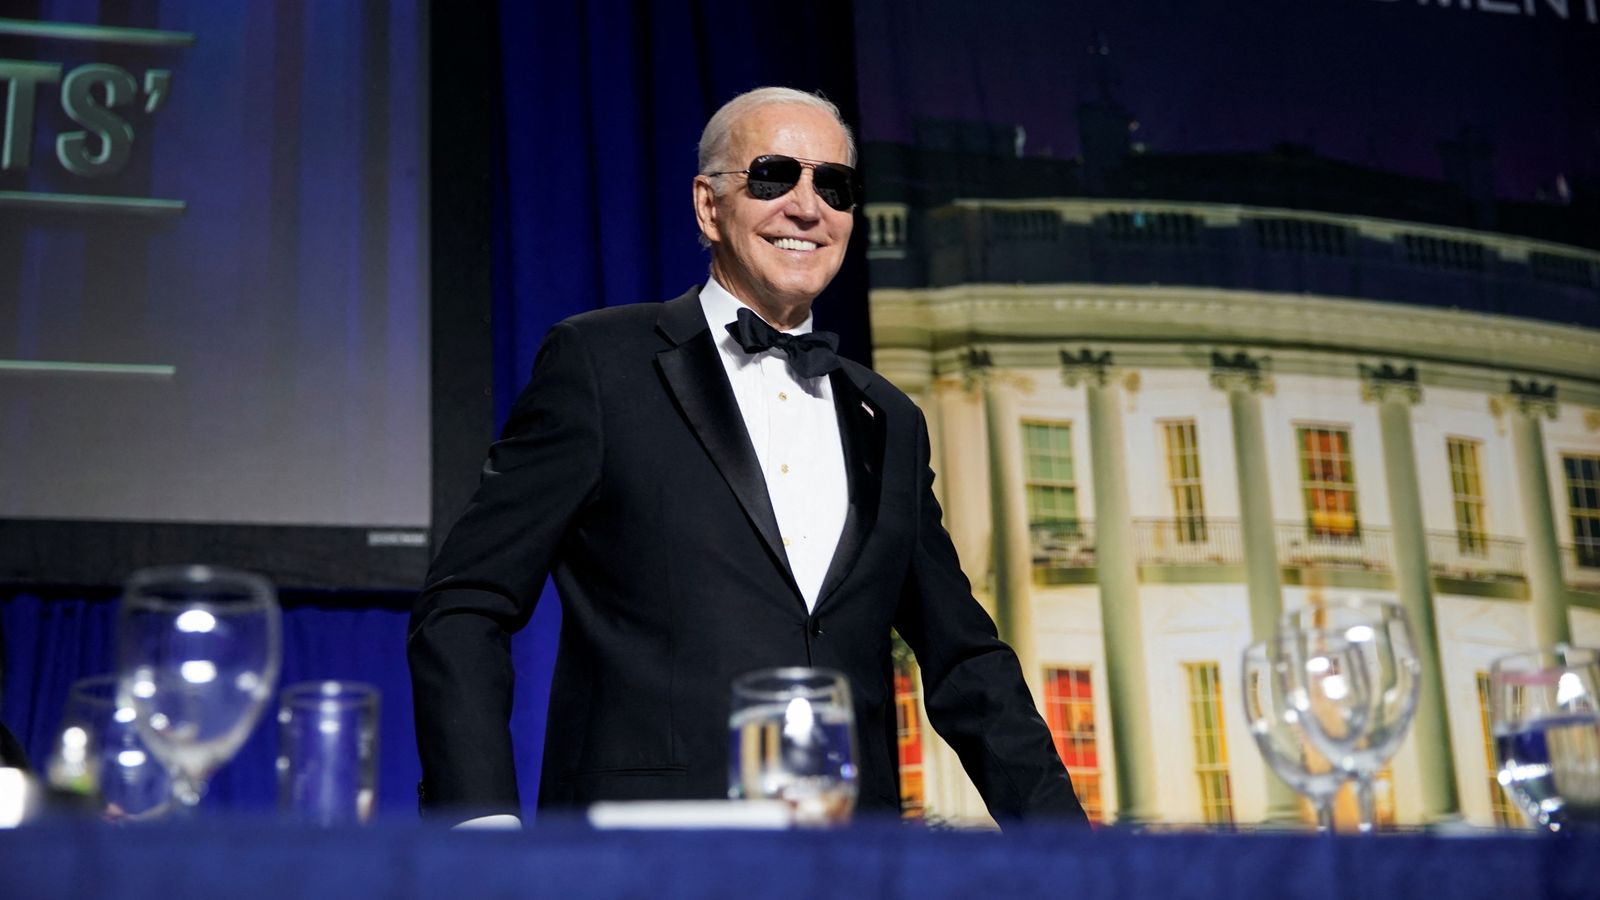 White House Correspondents' dinner: Celebs pack out event as Biden says he is 'working like hell' to free imprisoned journalists